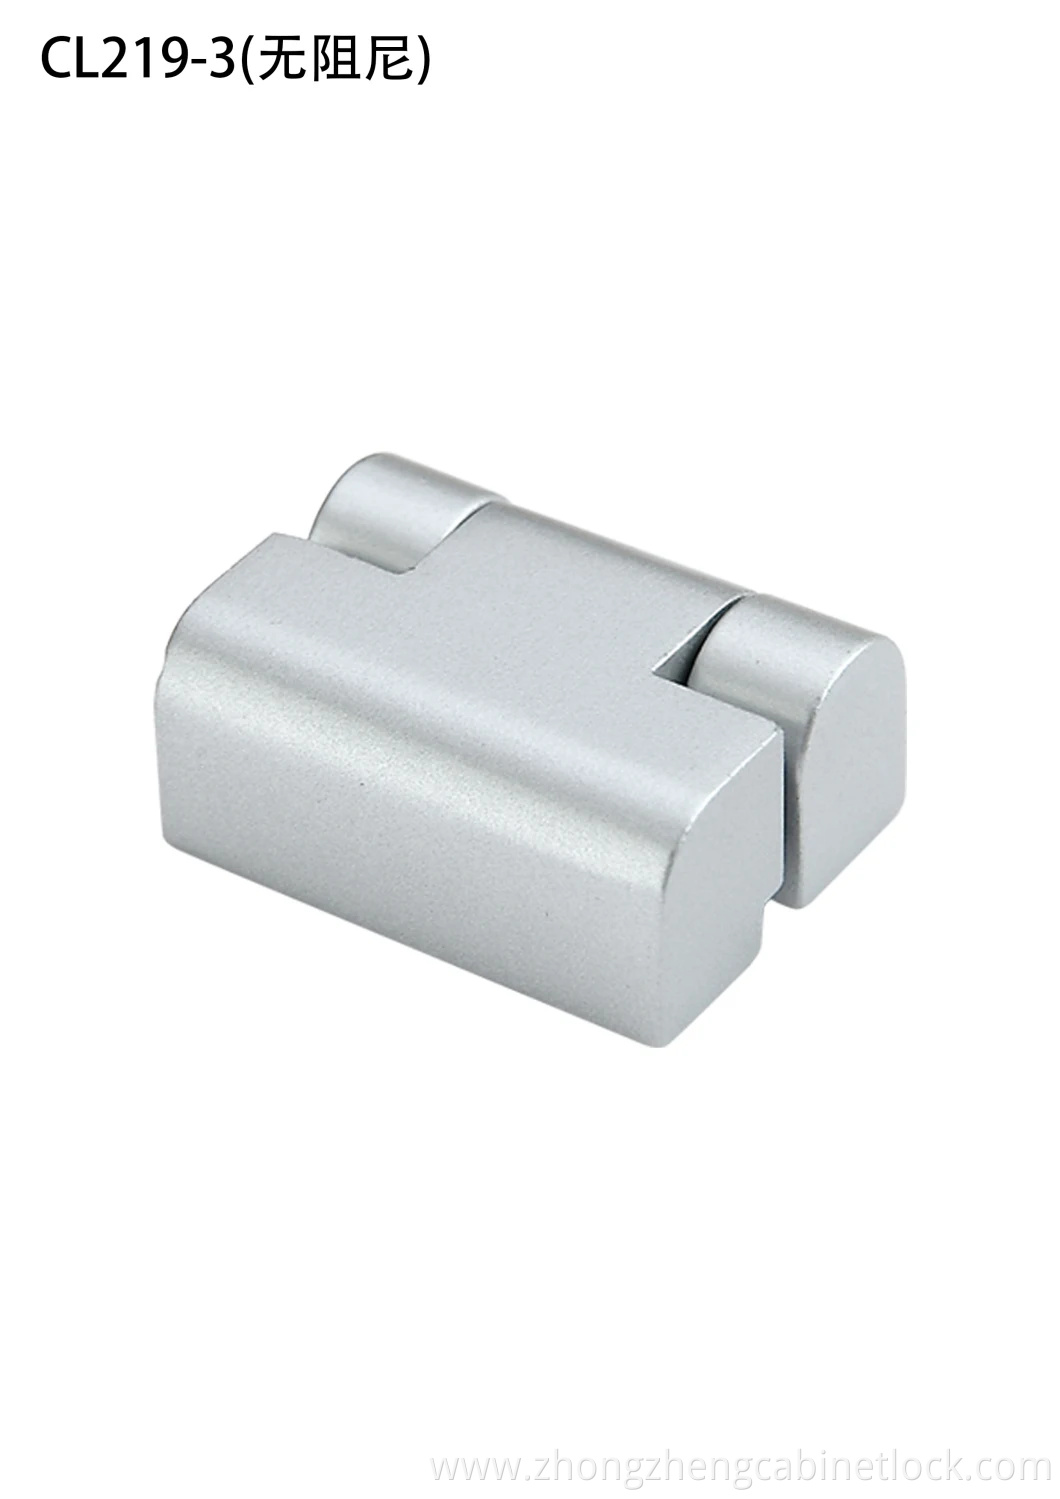 Industrial Accessories Lock with Hinge Series From Zonzen Cl219-3n